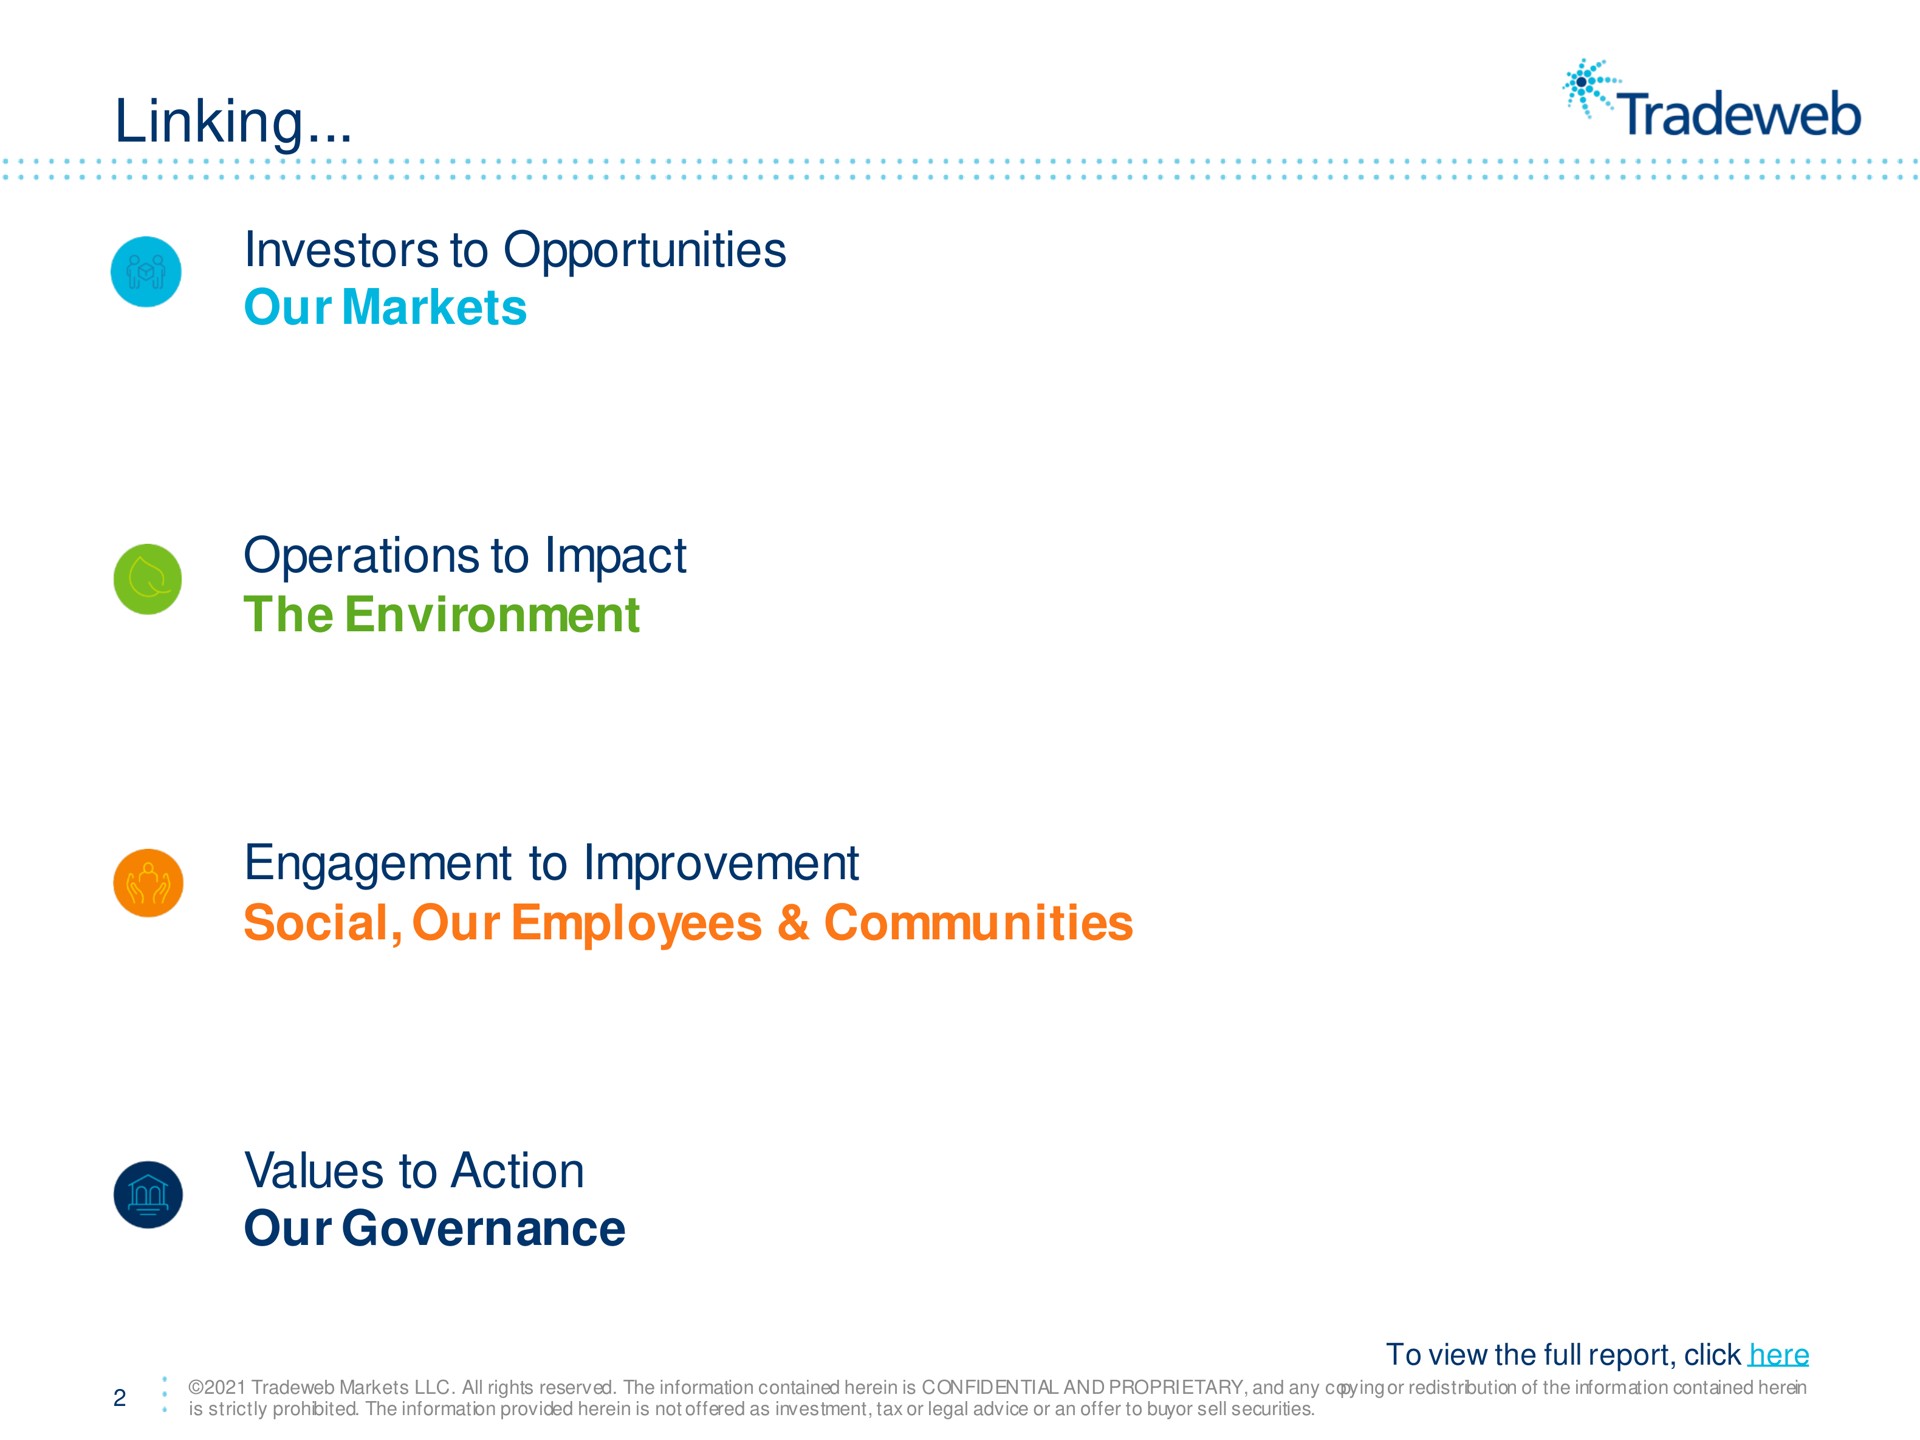 linking investors to opportunities our markets operations to impact engagement to improvement social our employees communities | Tradeweb